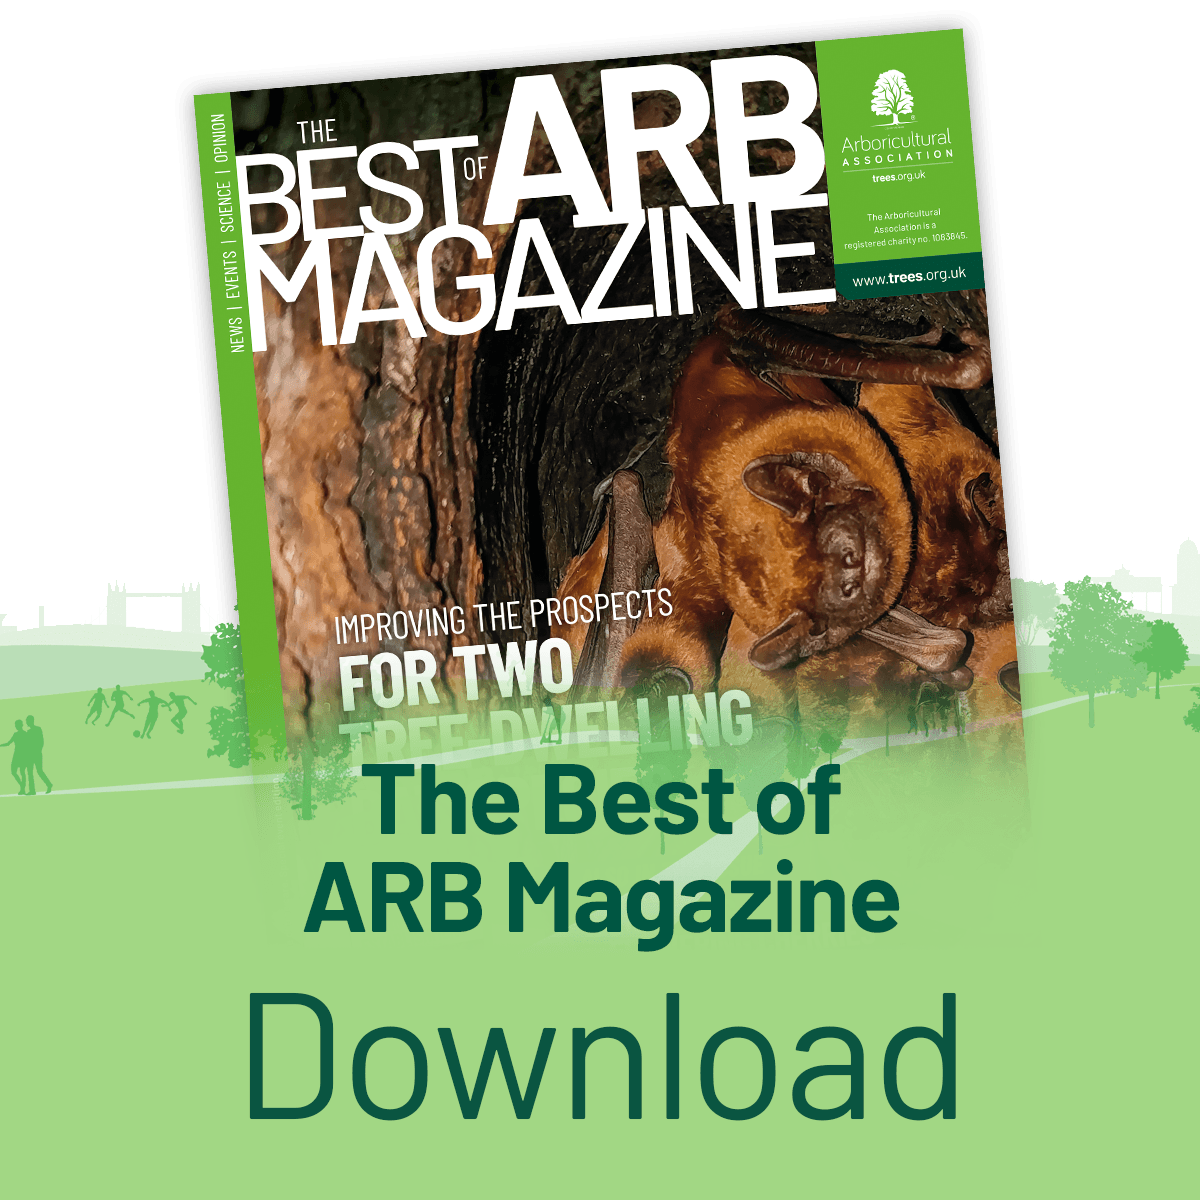 Click here to download the Best of ARB Magazine